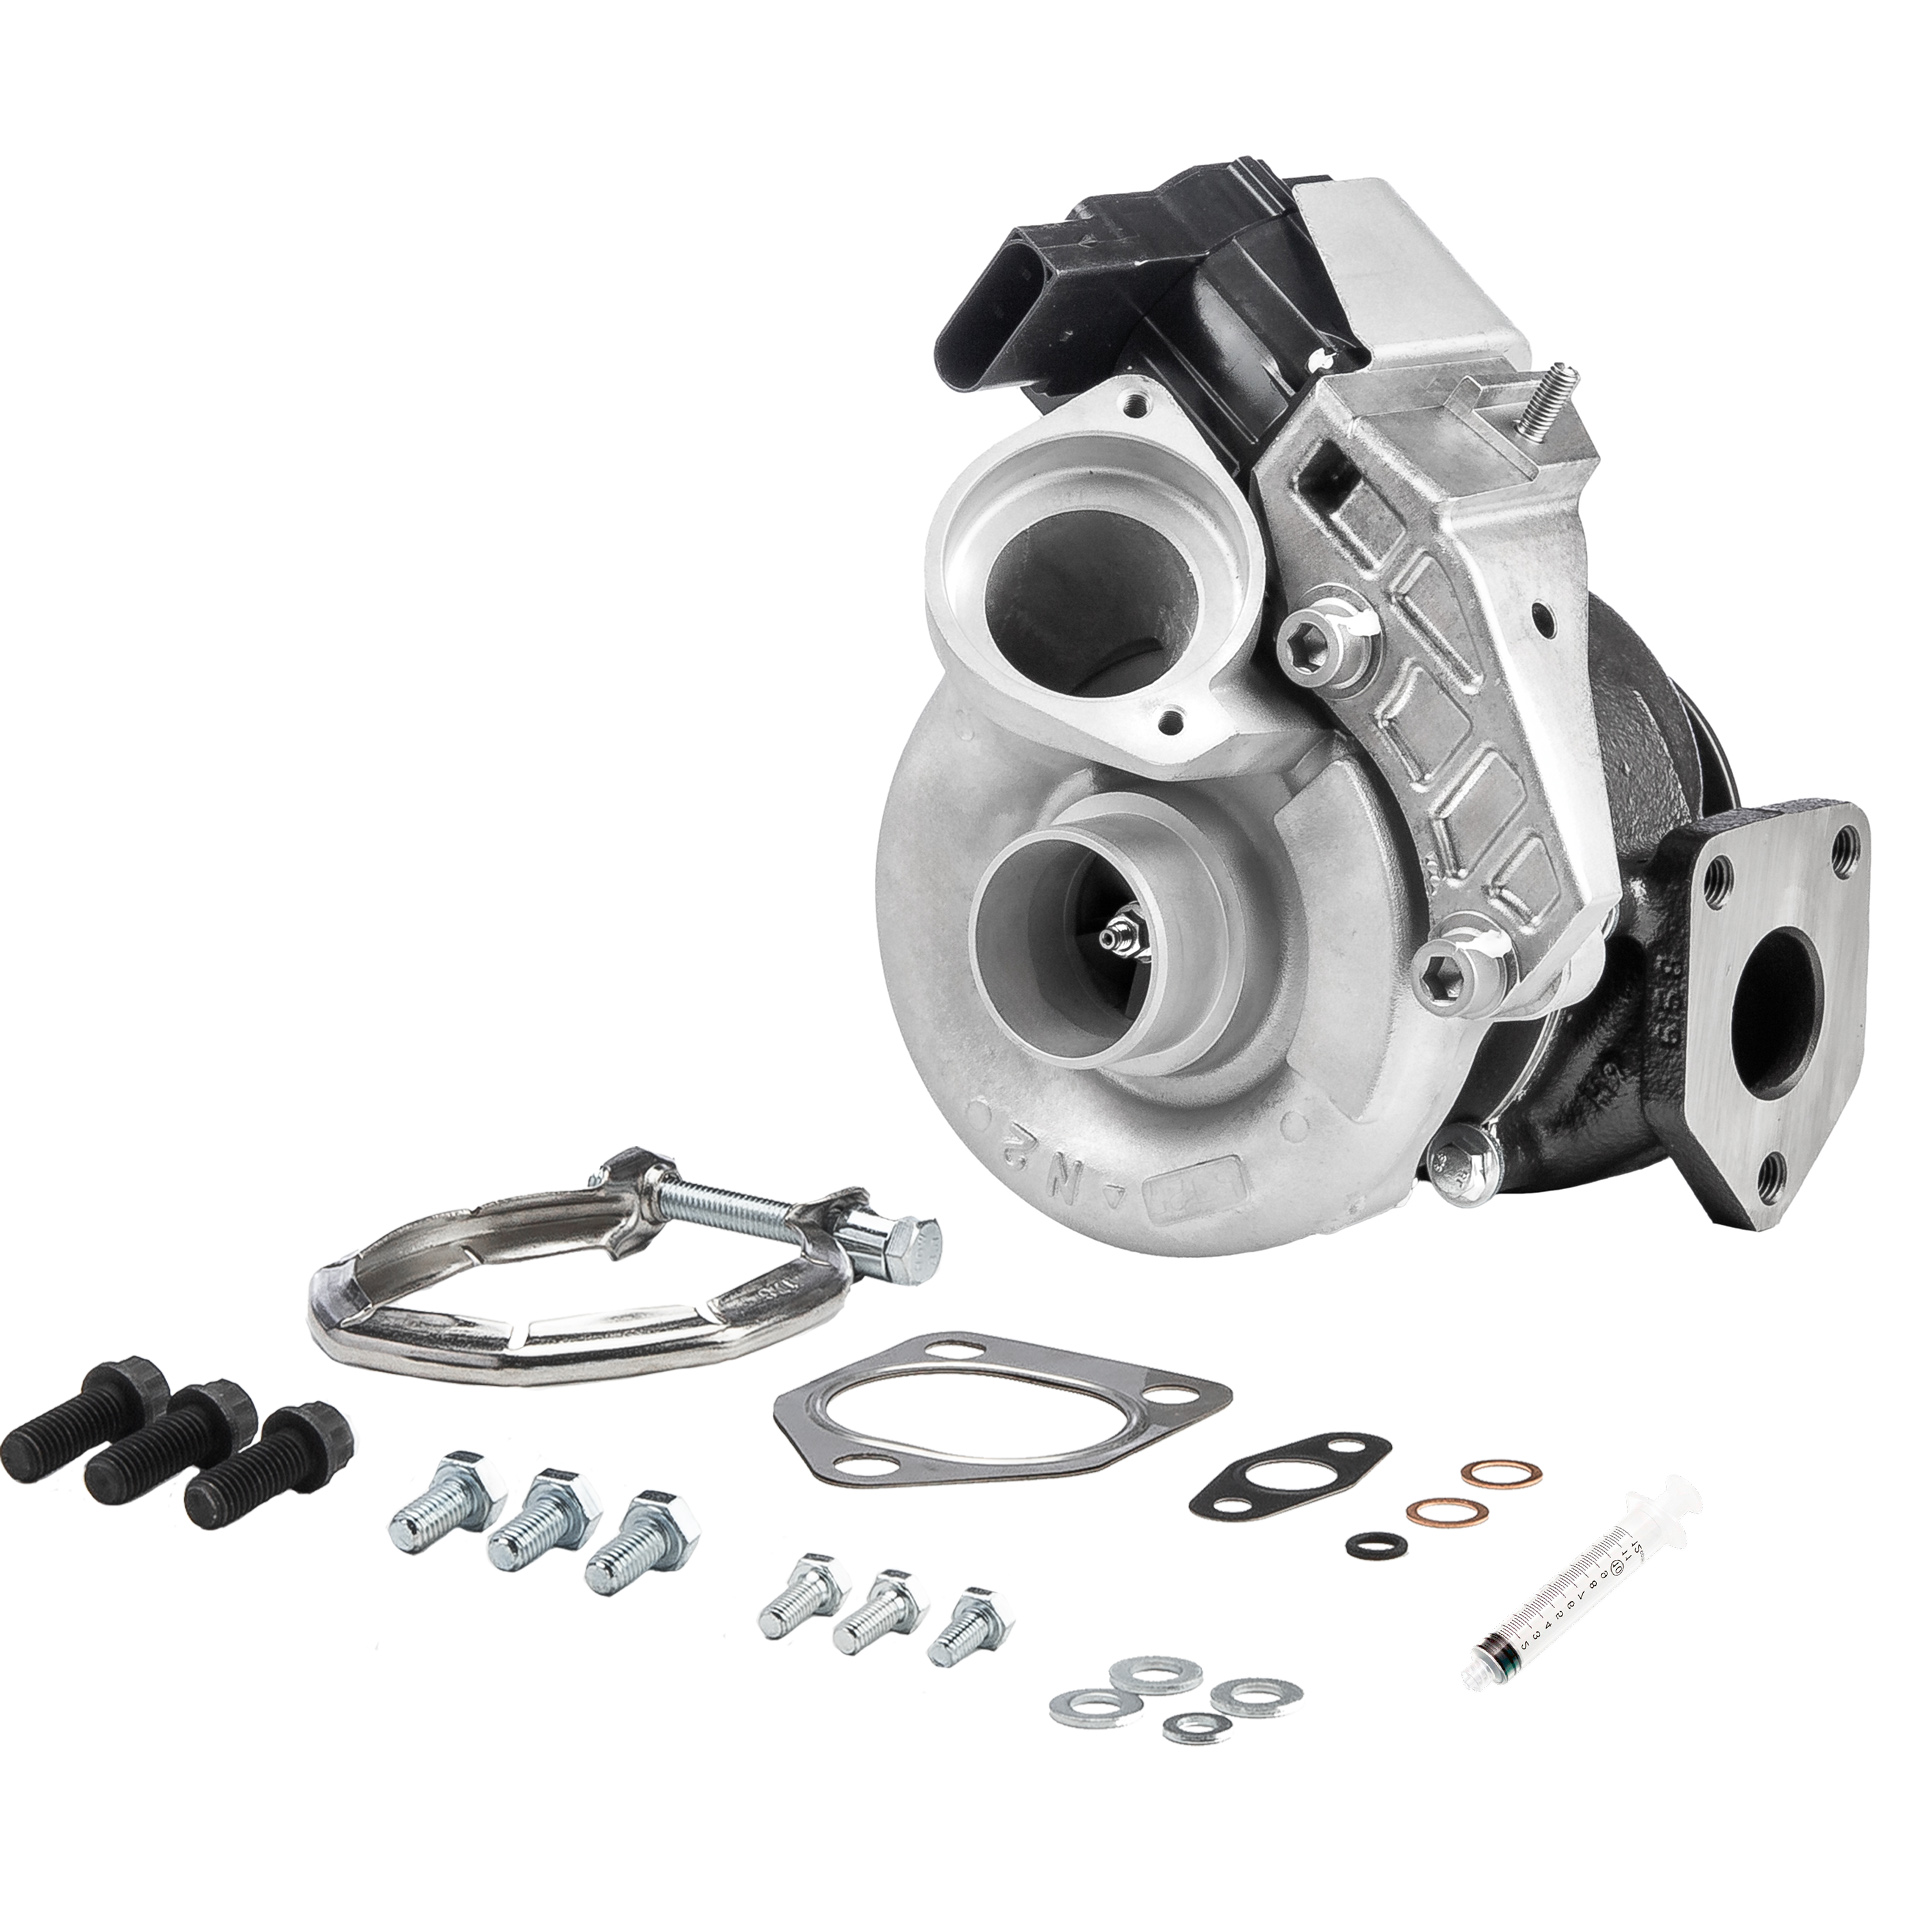 BR Turbo Turbo, with attachment material Turbo 49S3505761RSM buy